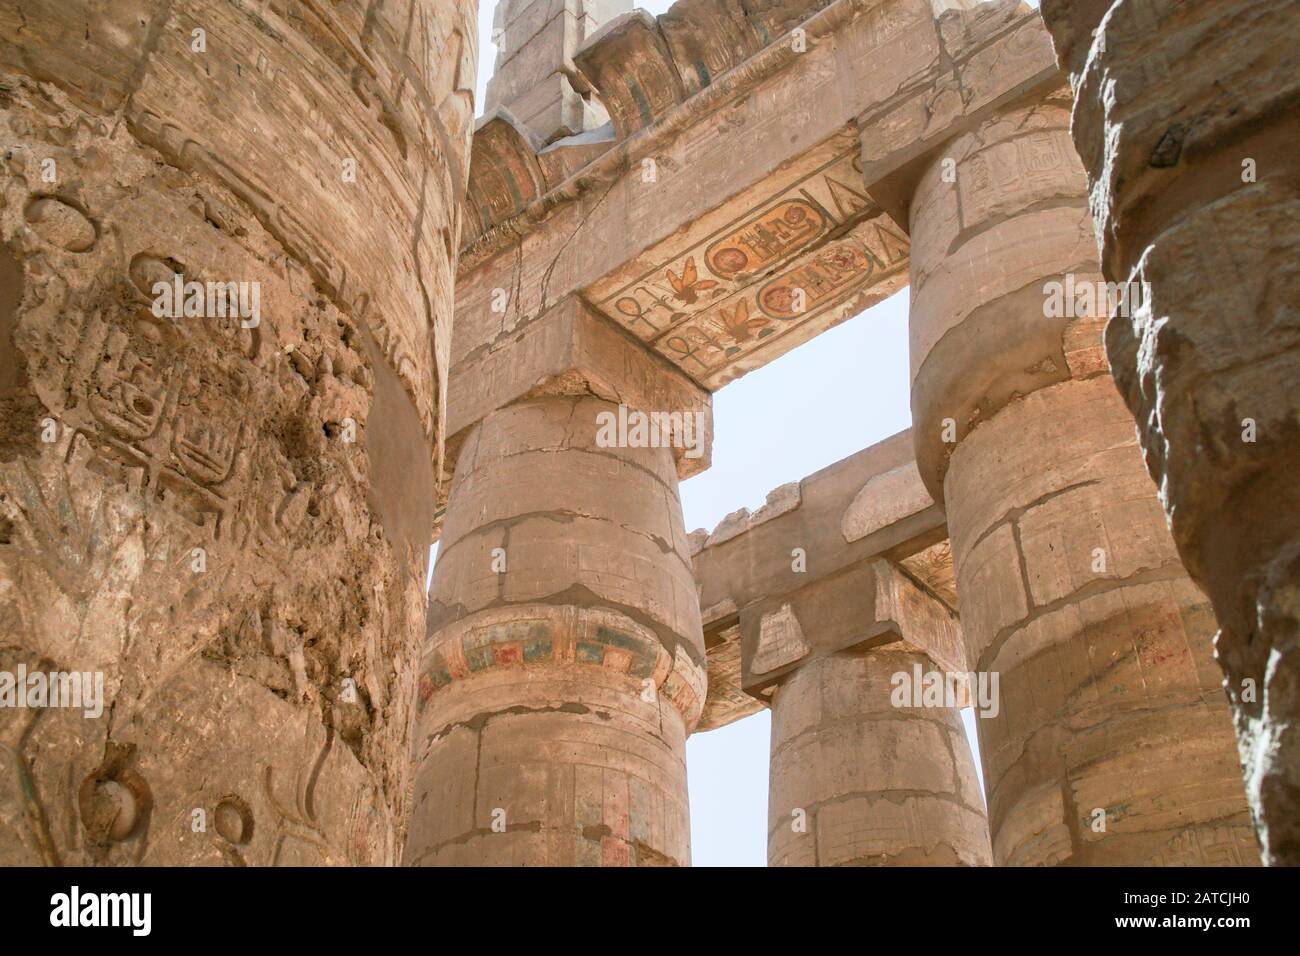 Luxor, Karnak, Egypt, Africa. Temple of Karnak. several columns inside the temple showing a cartouche, hieroglyphics and other relief carvings. Stock Photo